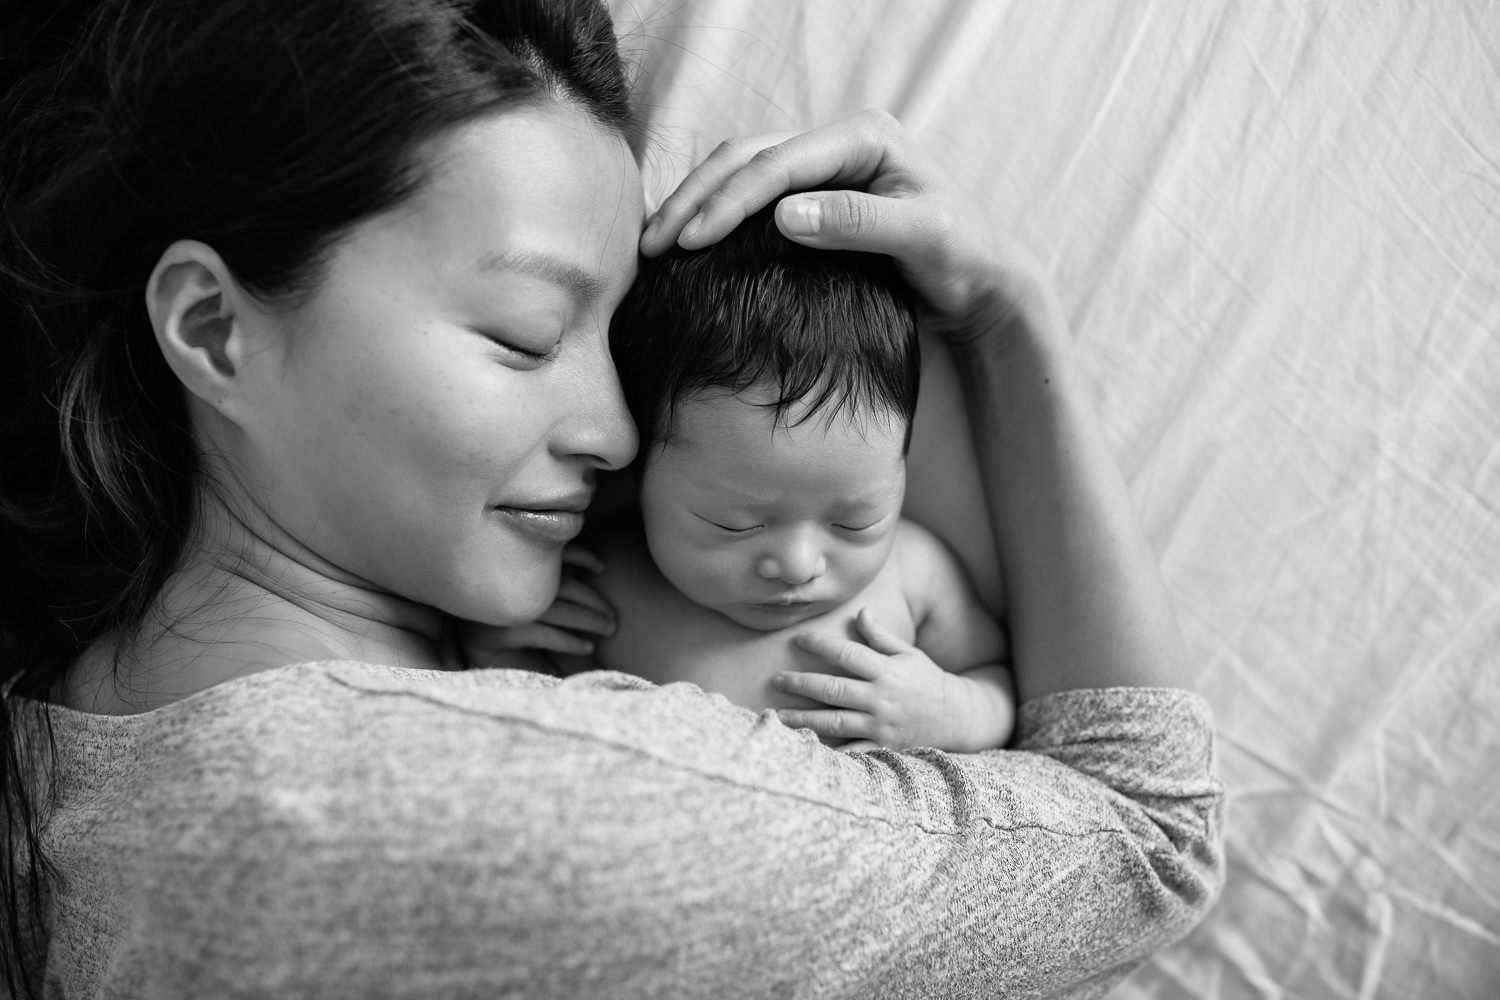 mother with long dark hair lying on bed, sleeping 2 week old baby boy snuggled next to her face, her arm around him and hand resting in son's head, eyes closed - Stouffville Lifestyle Photos